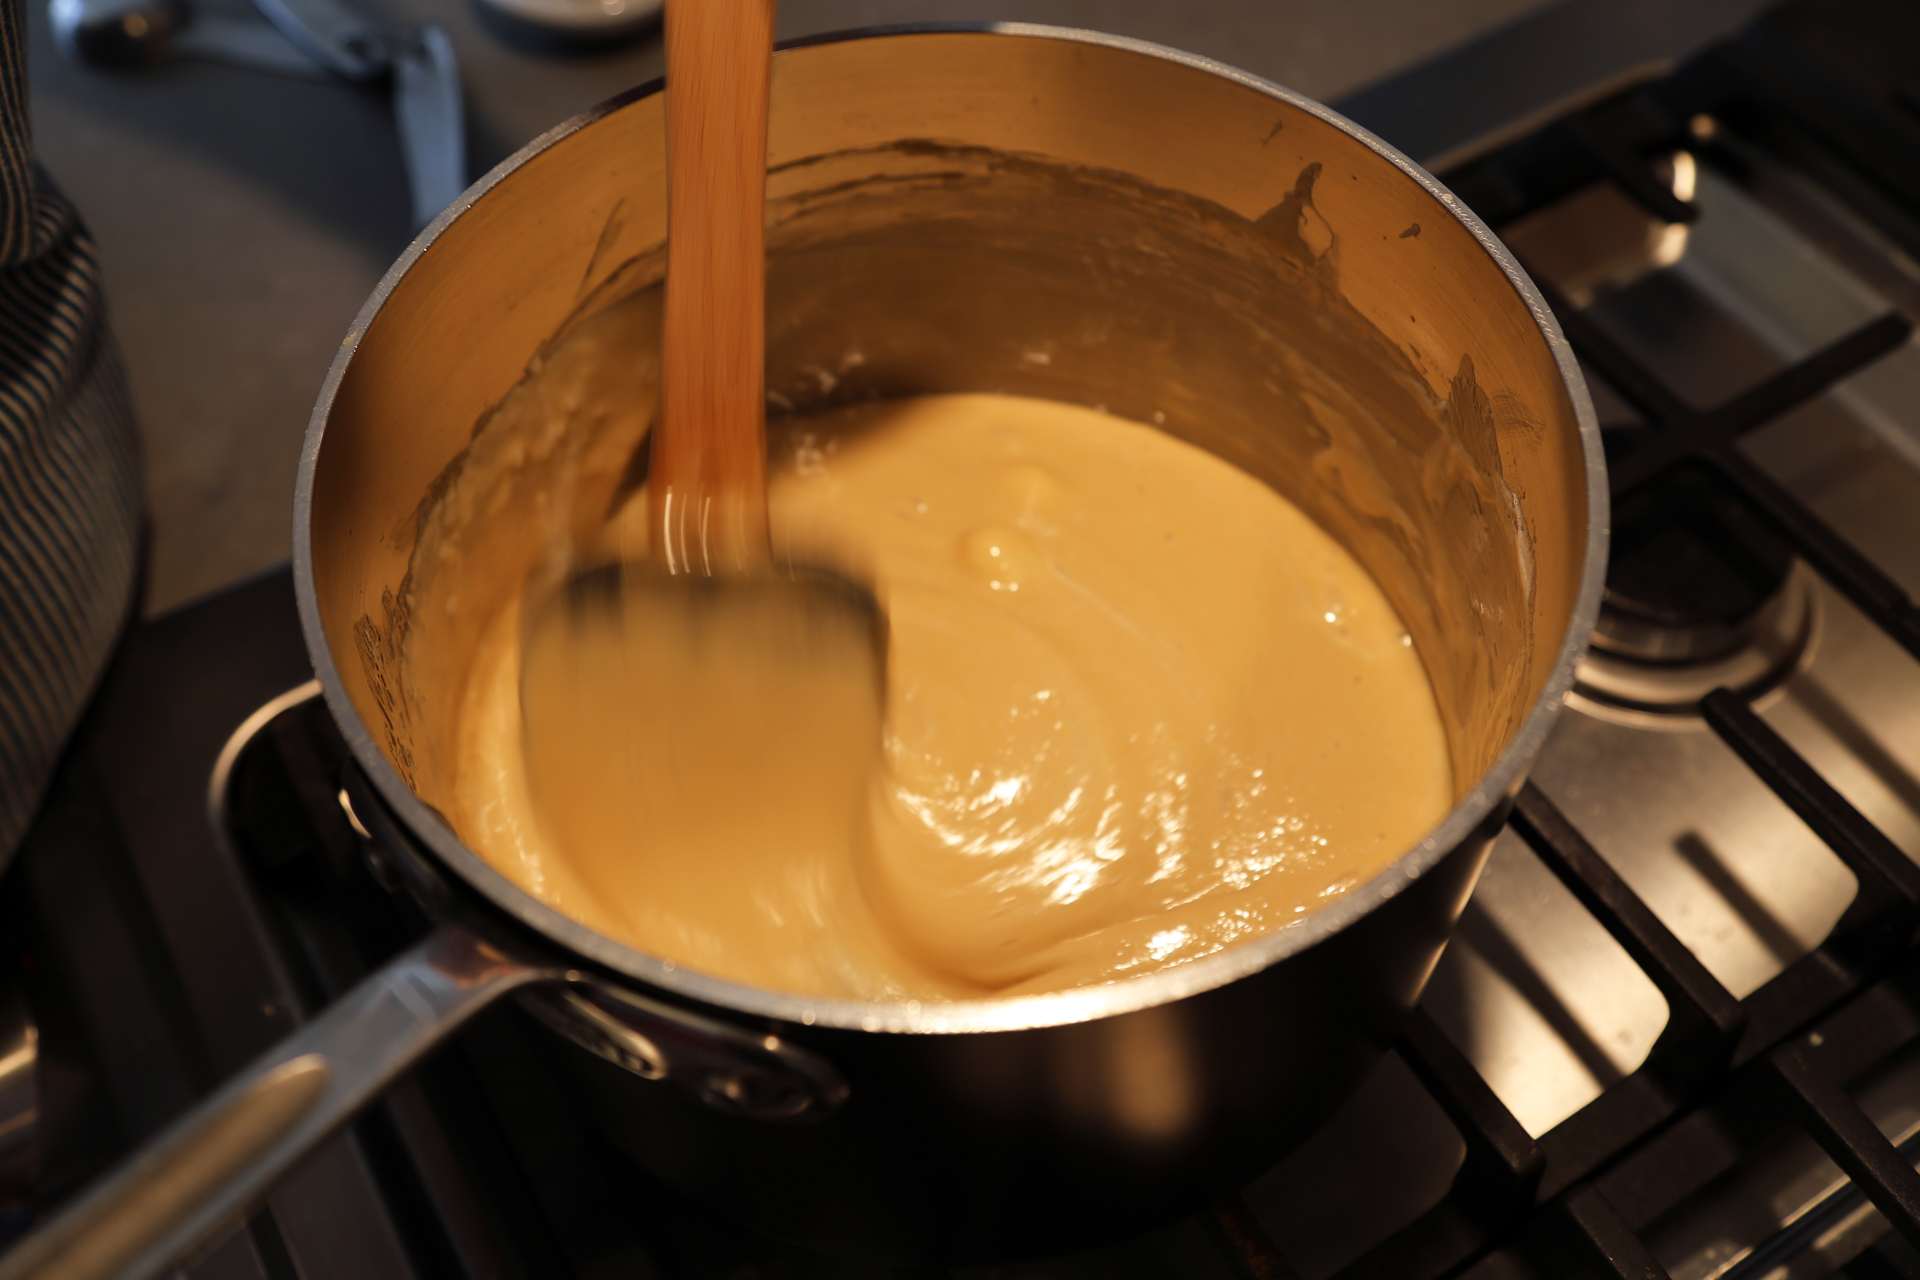 In a saucepan over medium-high heat, melt the butter. Add the sugar, cream, and corn syrup and cook, stirring, until mixture thickens and gets syrupy.